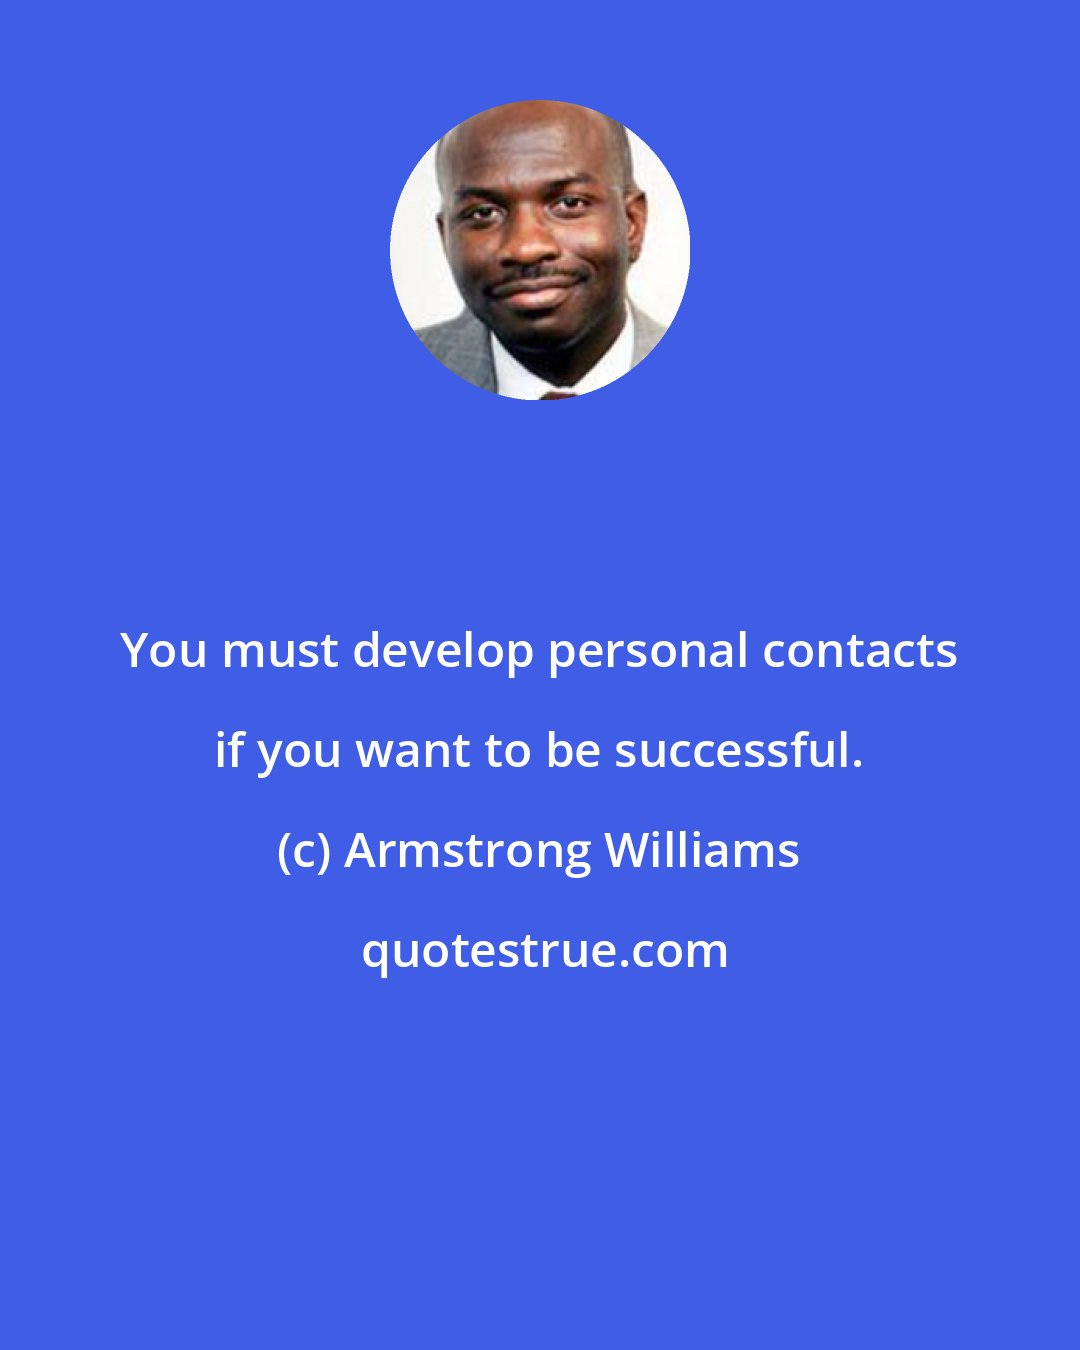 Armstrong Williams: You must develop personal contacts if you want to be successful.